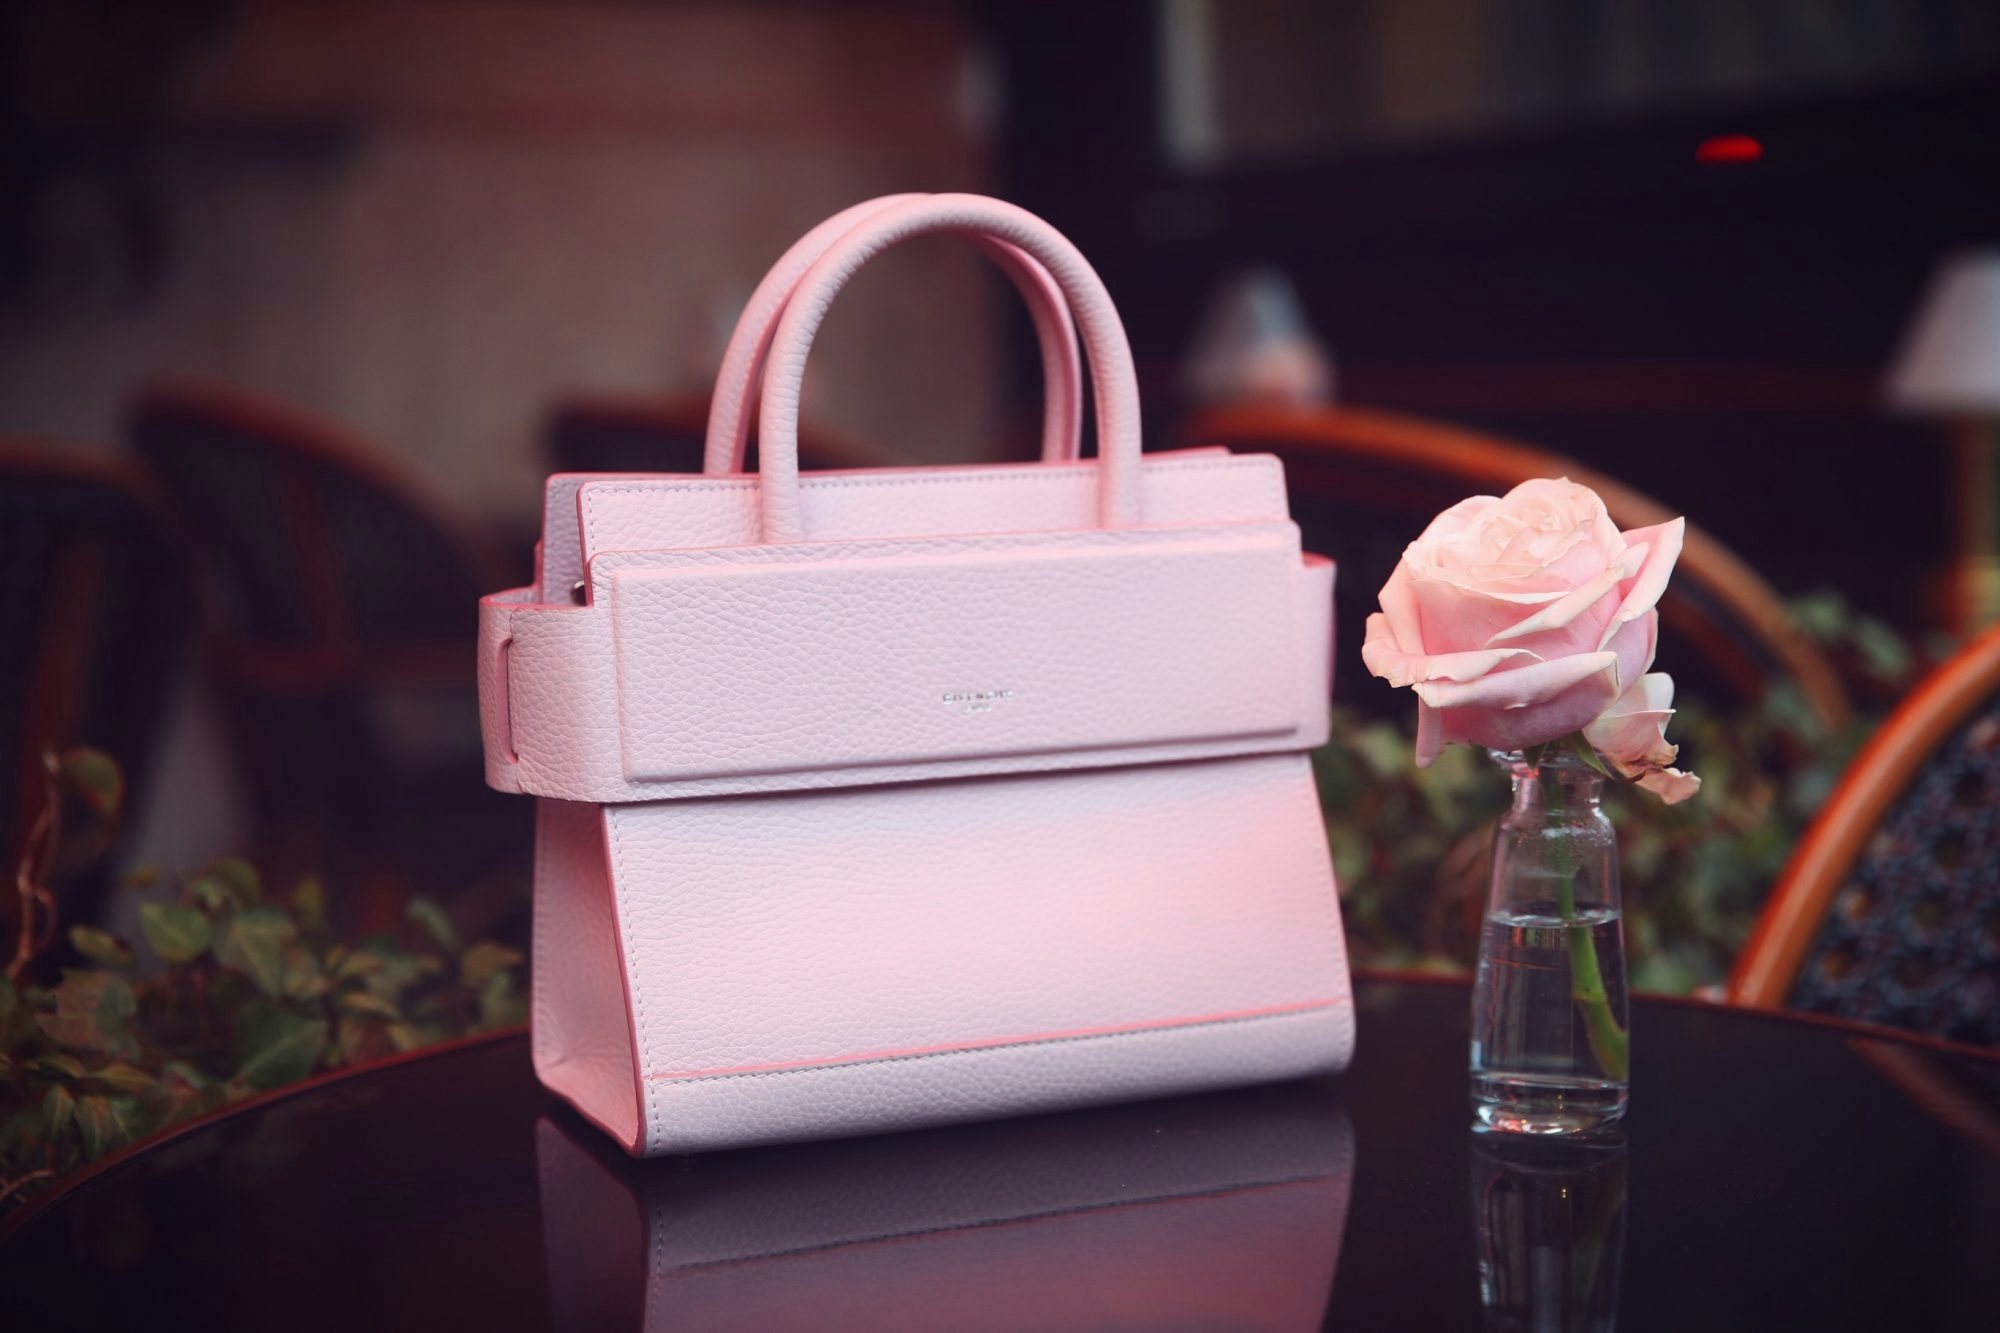 Mr. Bags teamed up with Givenchy to release this "Mini Horizon" handbag exclusively to his followers for Valentine's Day. Photo: Courtesy